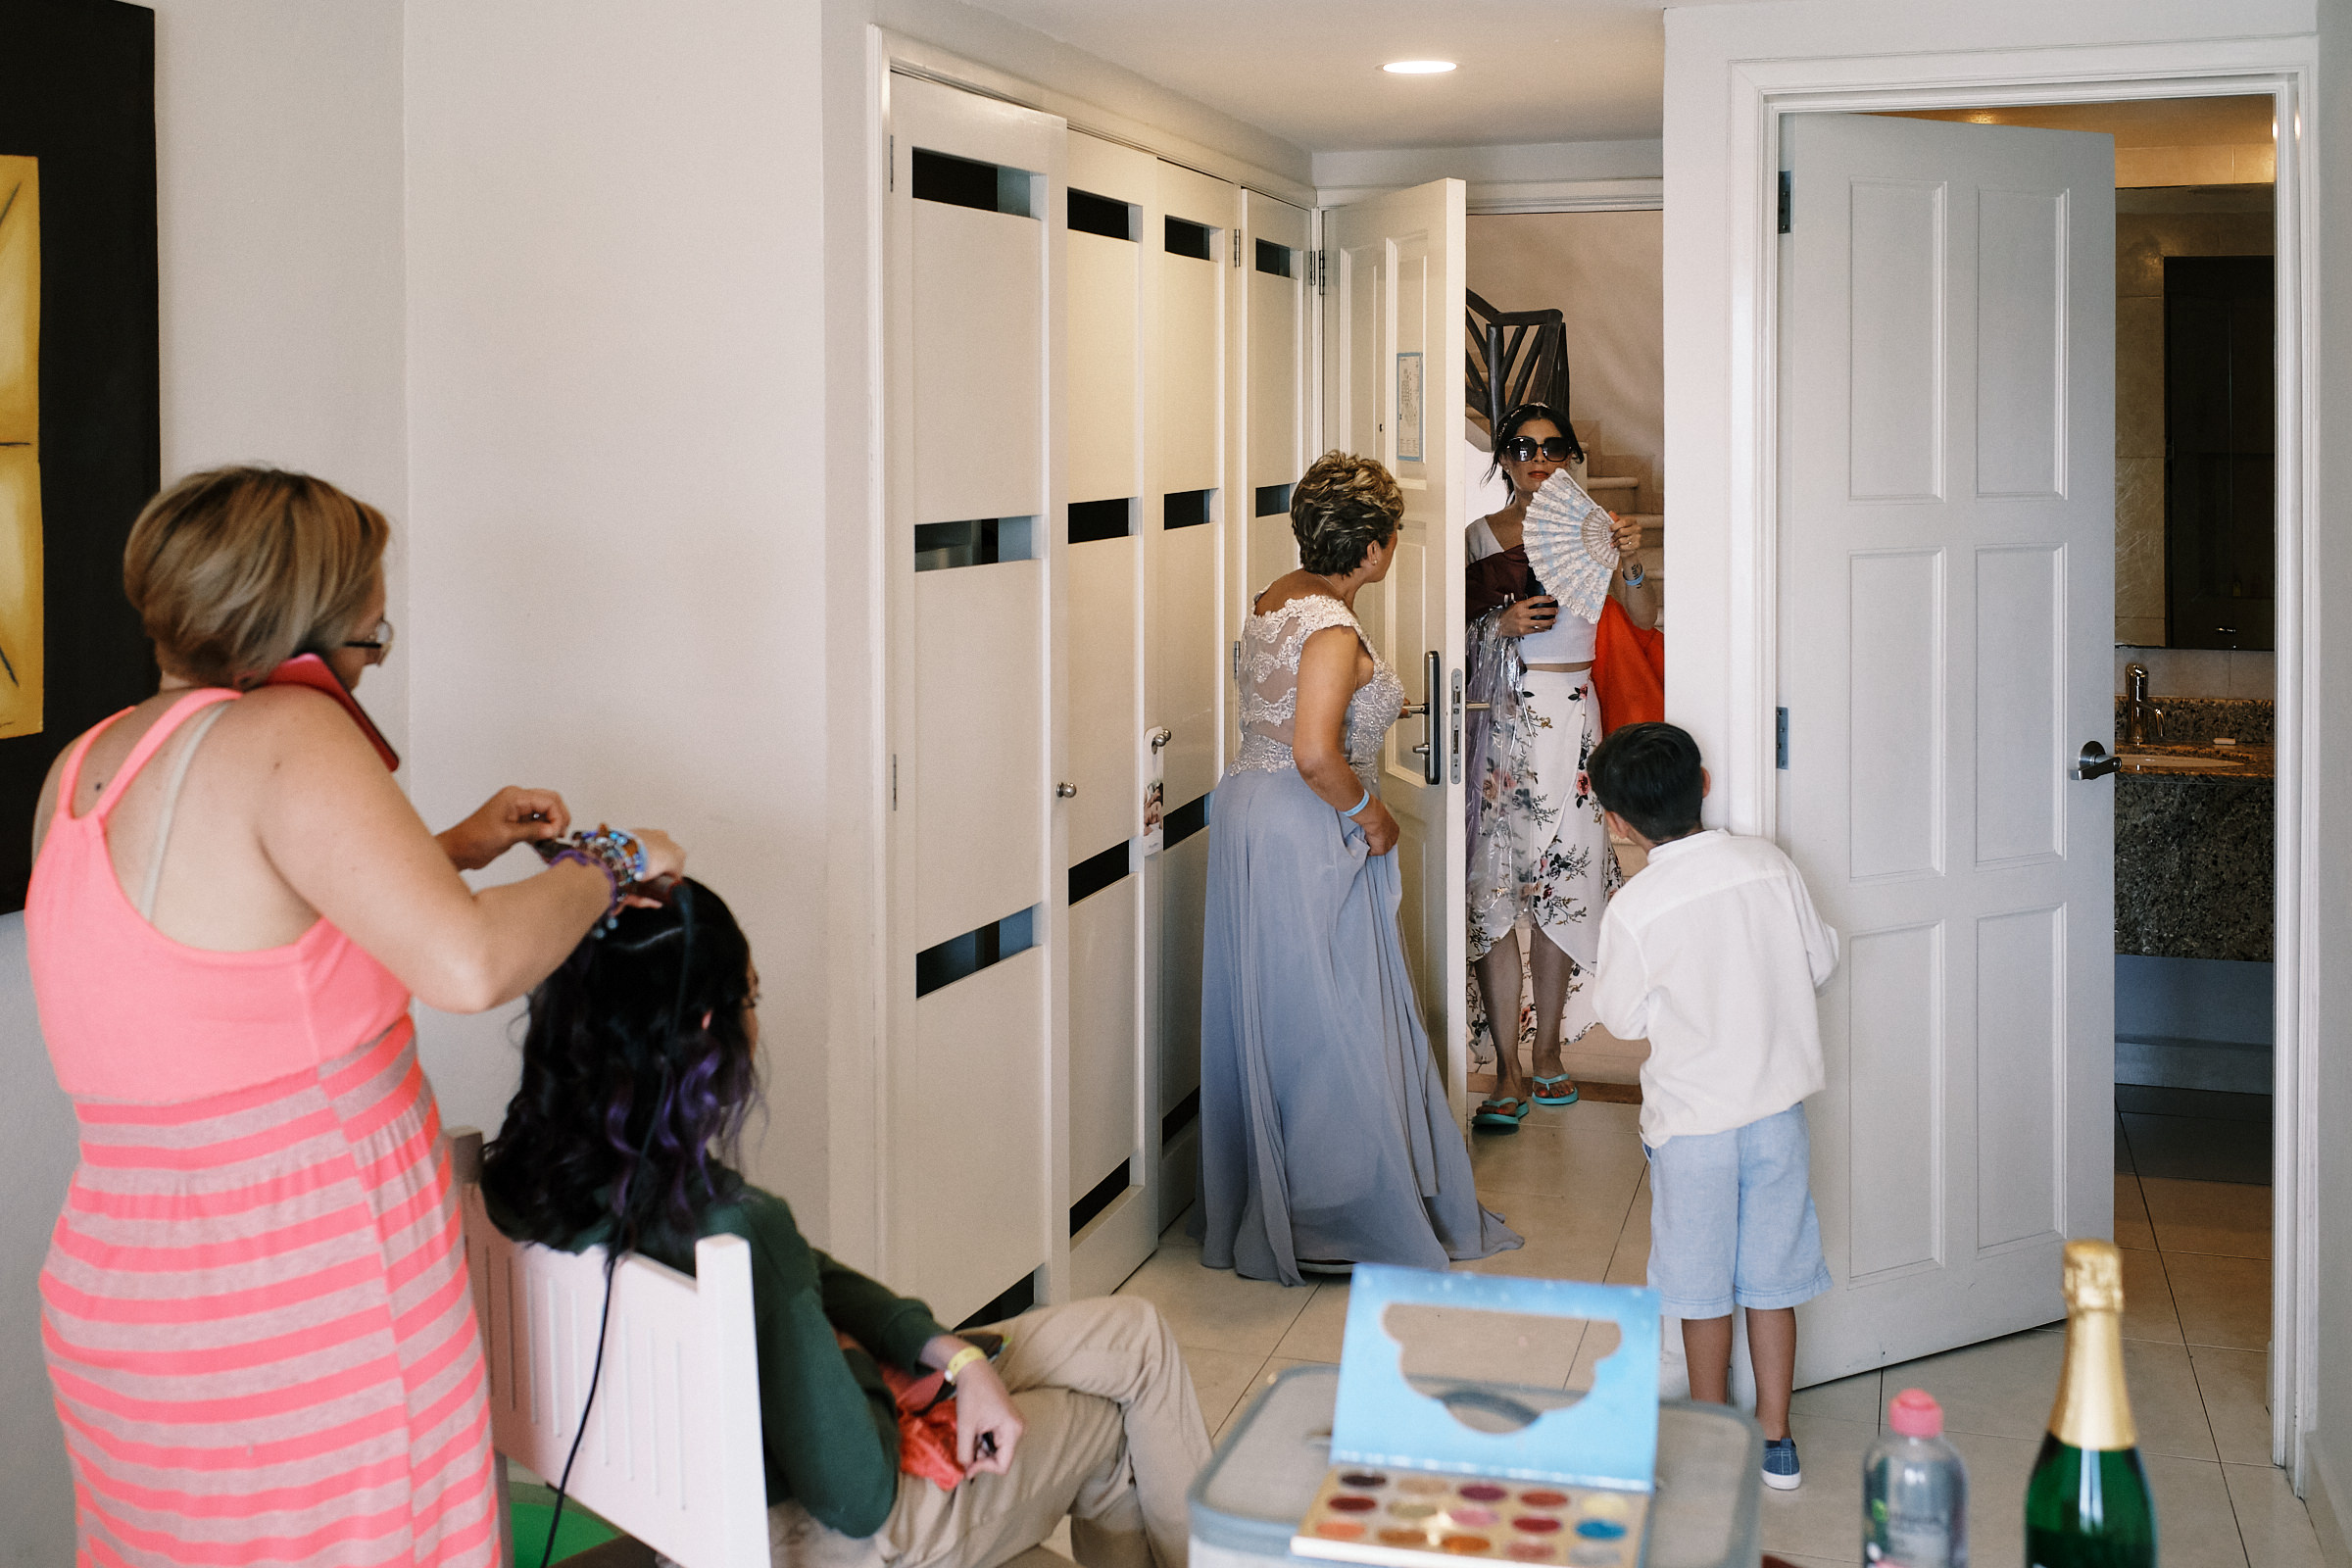 Bridesmaid Enters Getting Ready Room